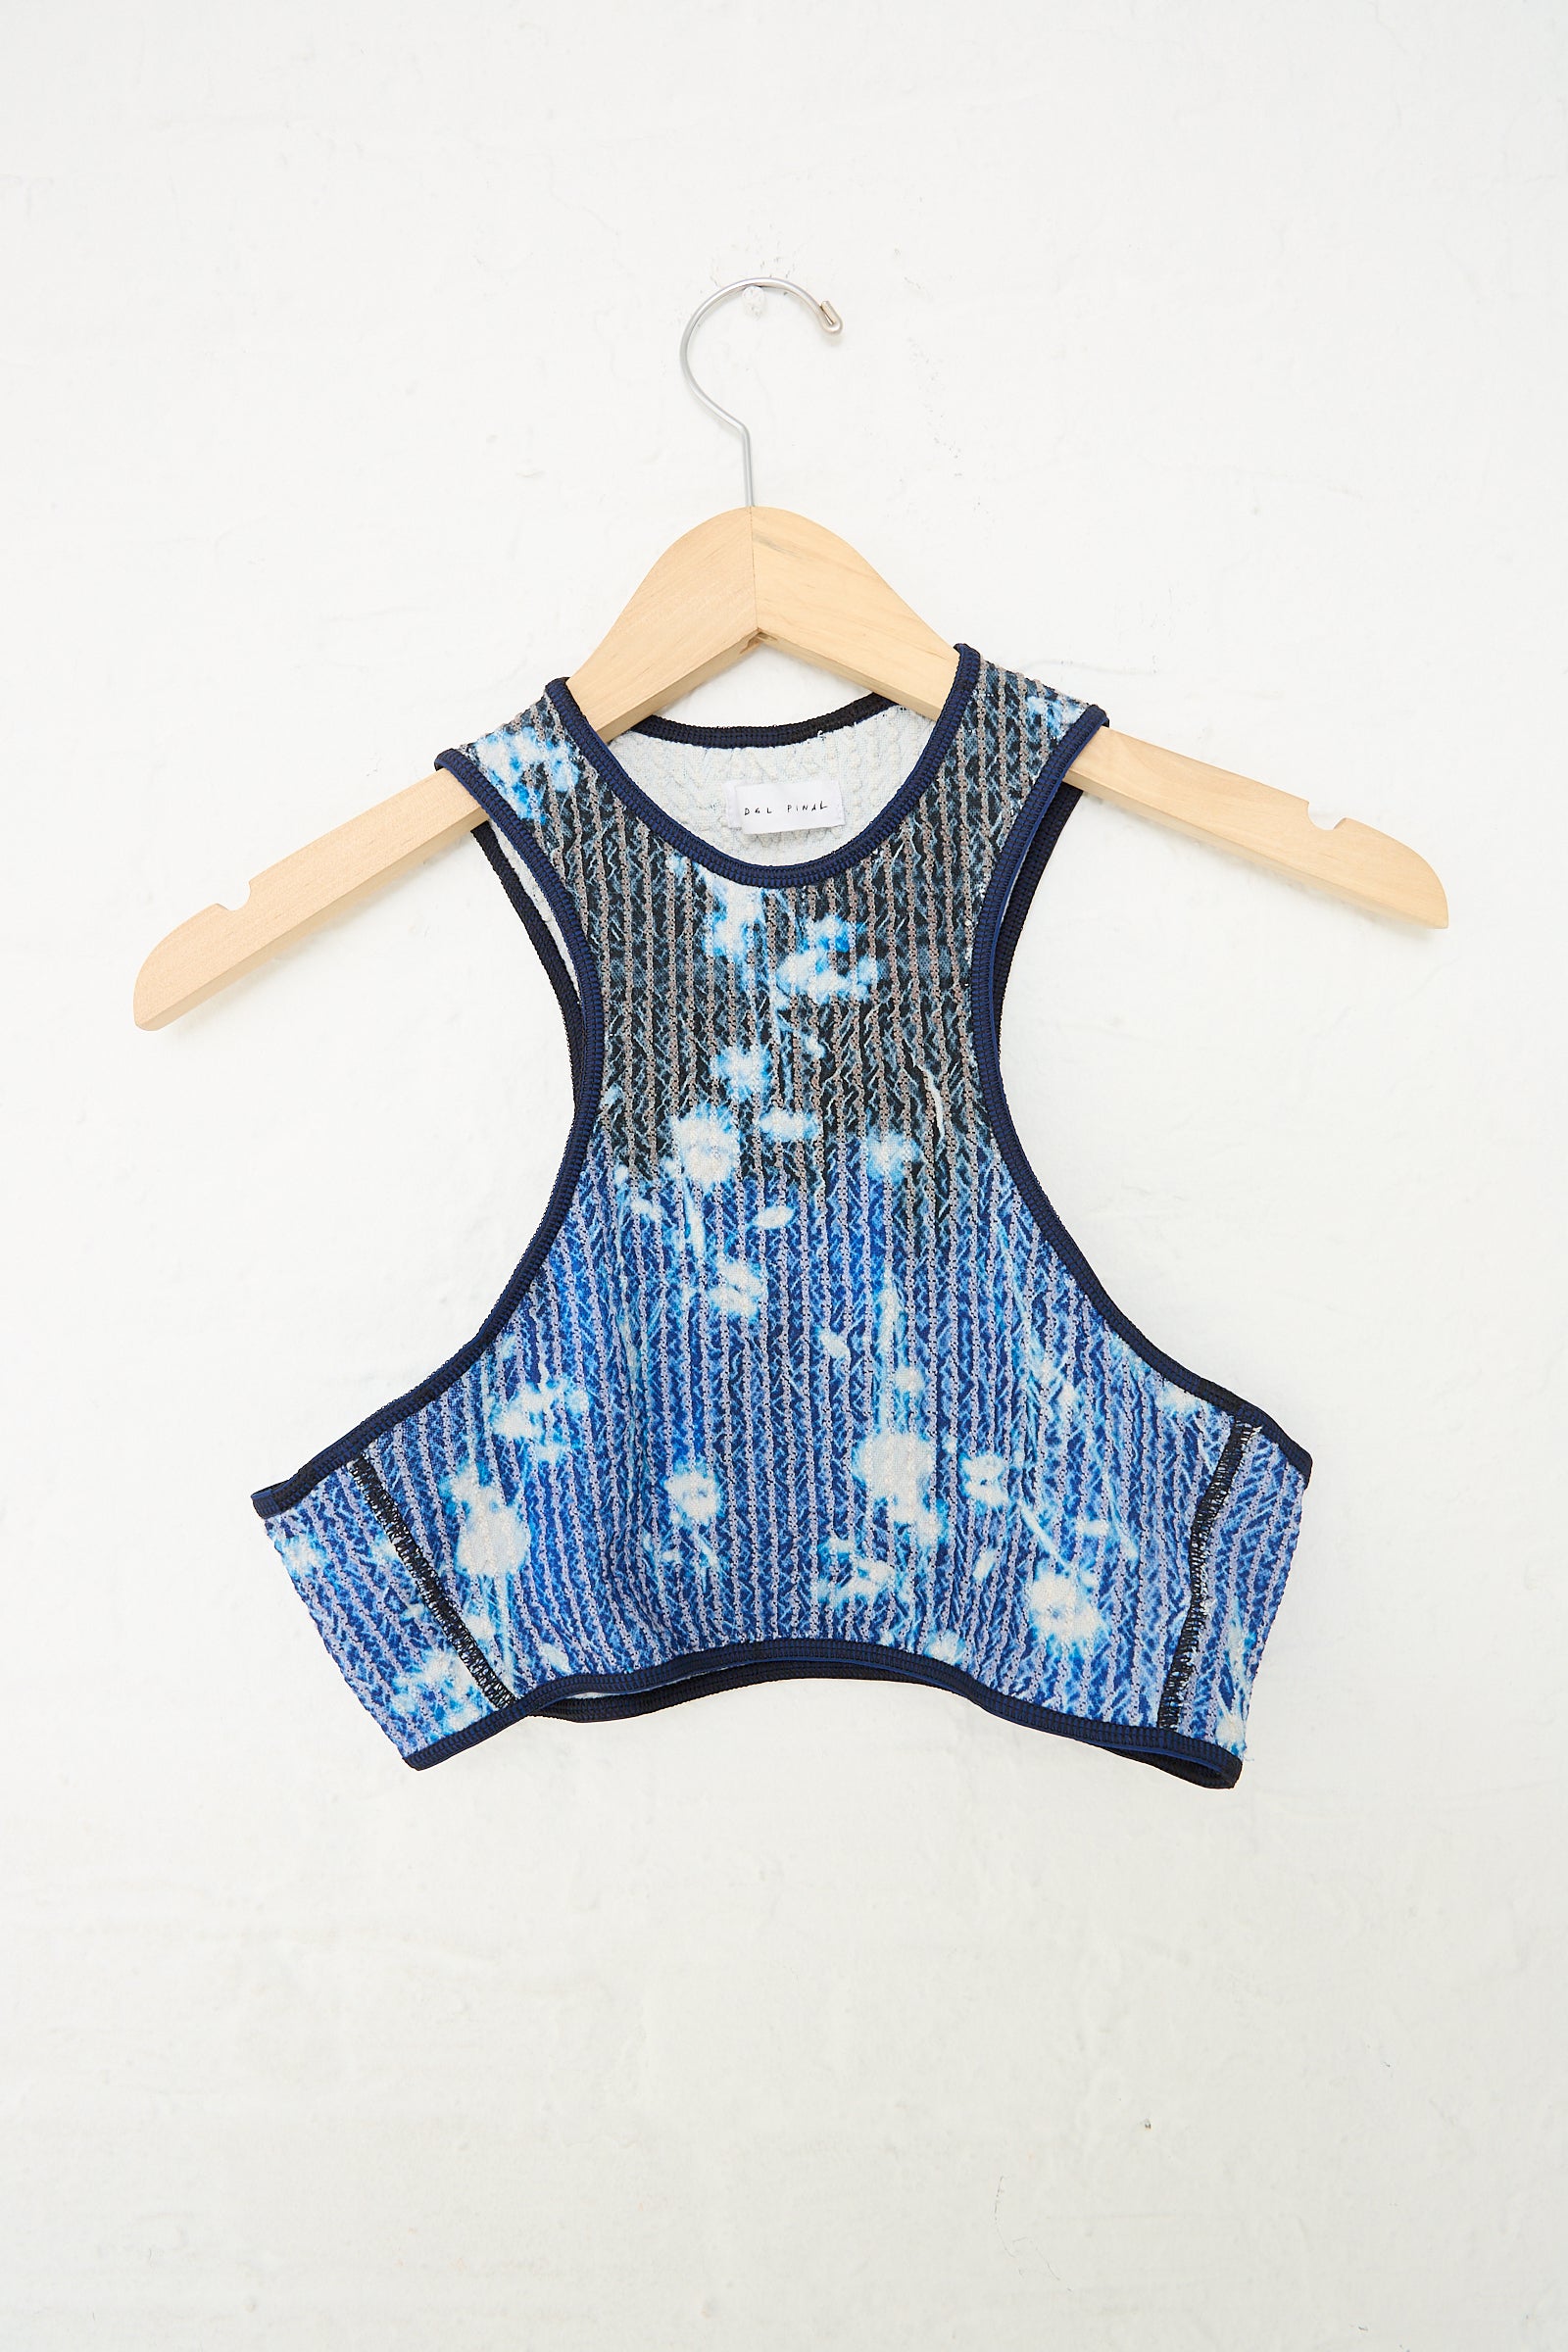 A Jasmine Screen Printed Stretch Weave Crop Top Bikini in Midnight Blue by Luna Del Pinal hanging on a hanger.